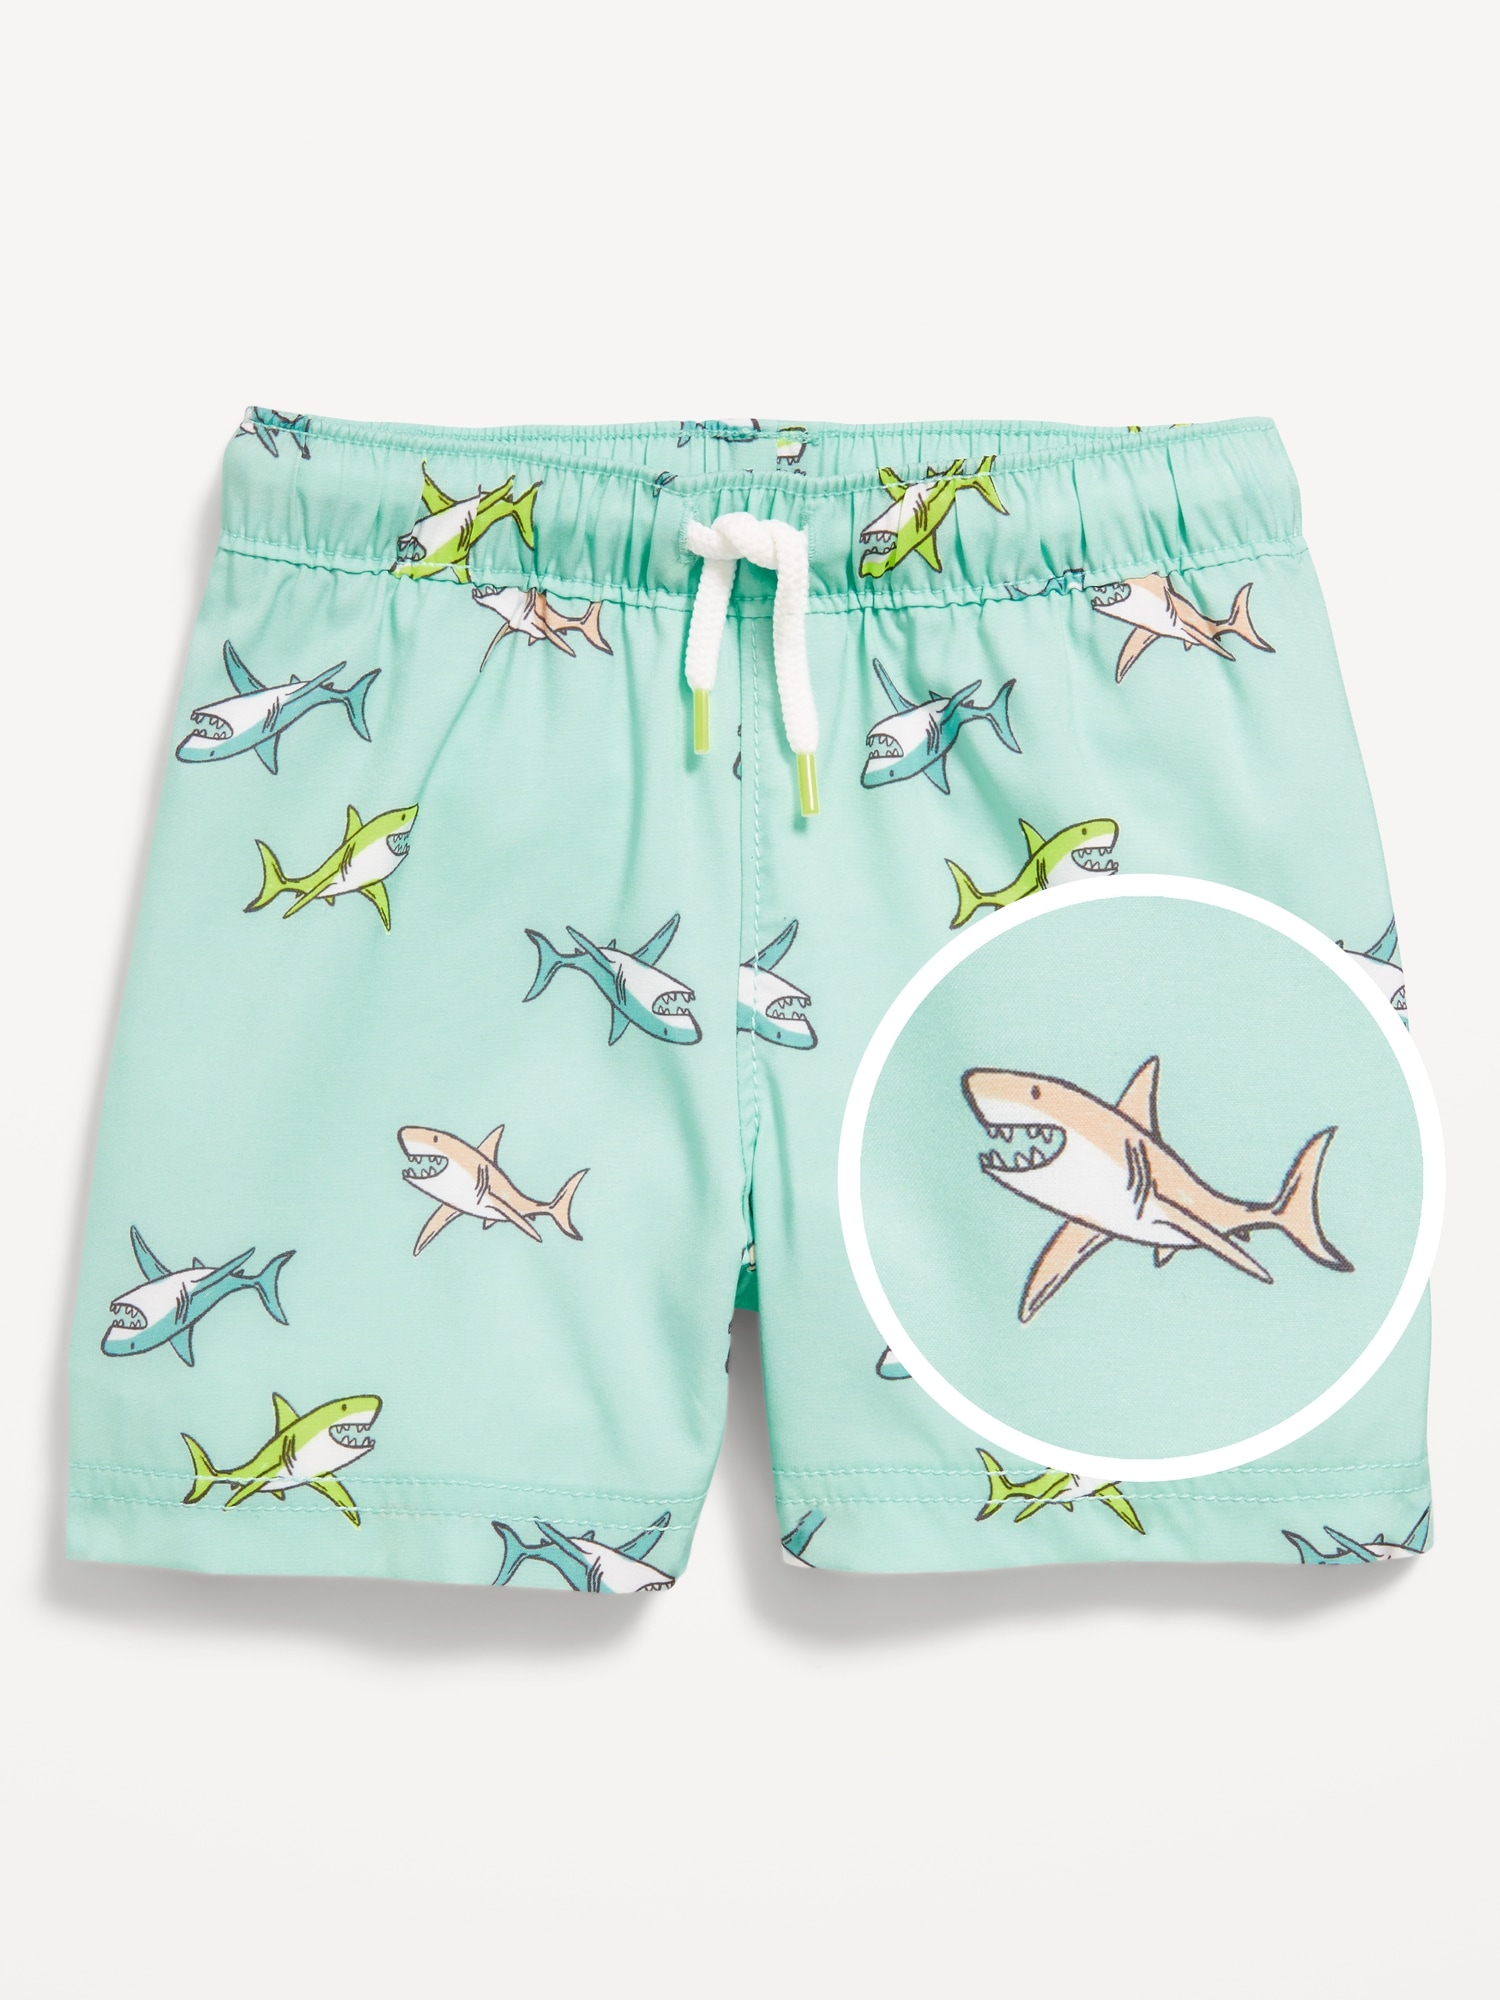 Matching Printed Swim Trunks for Baby